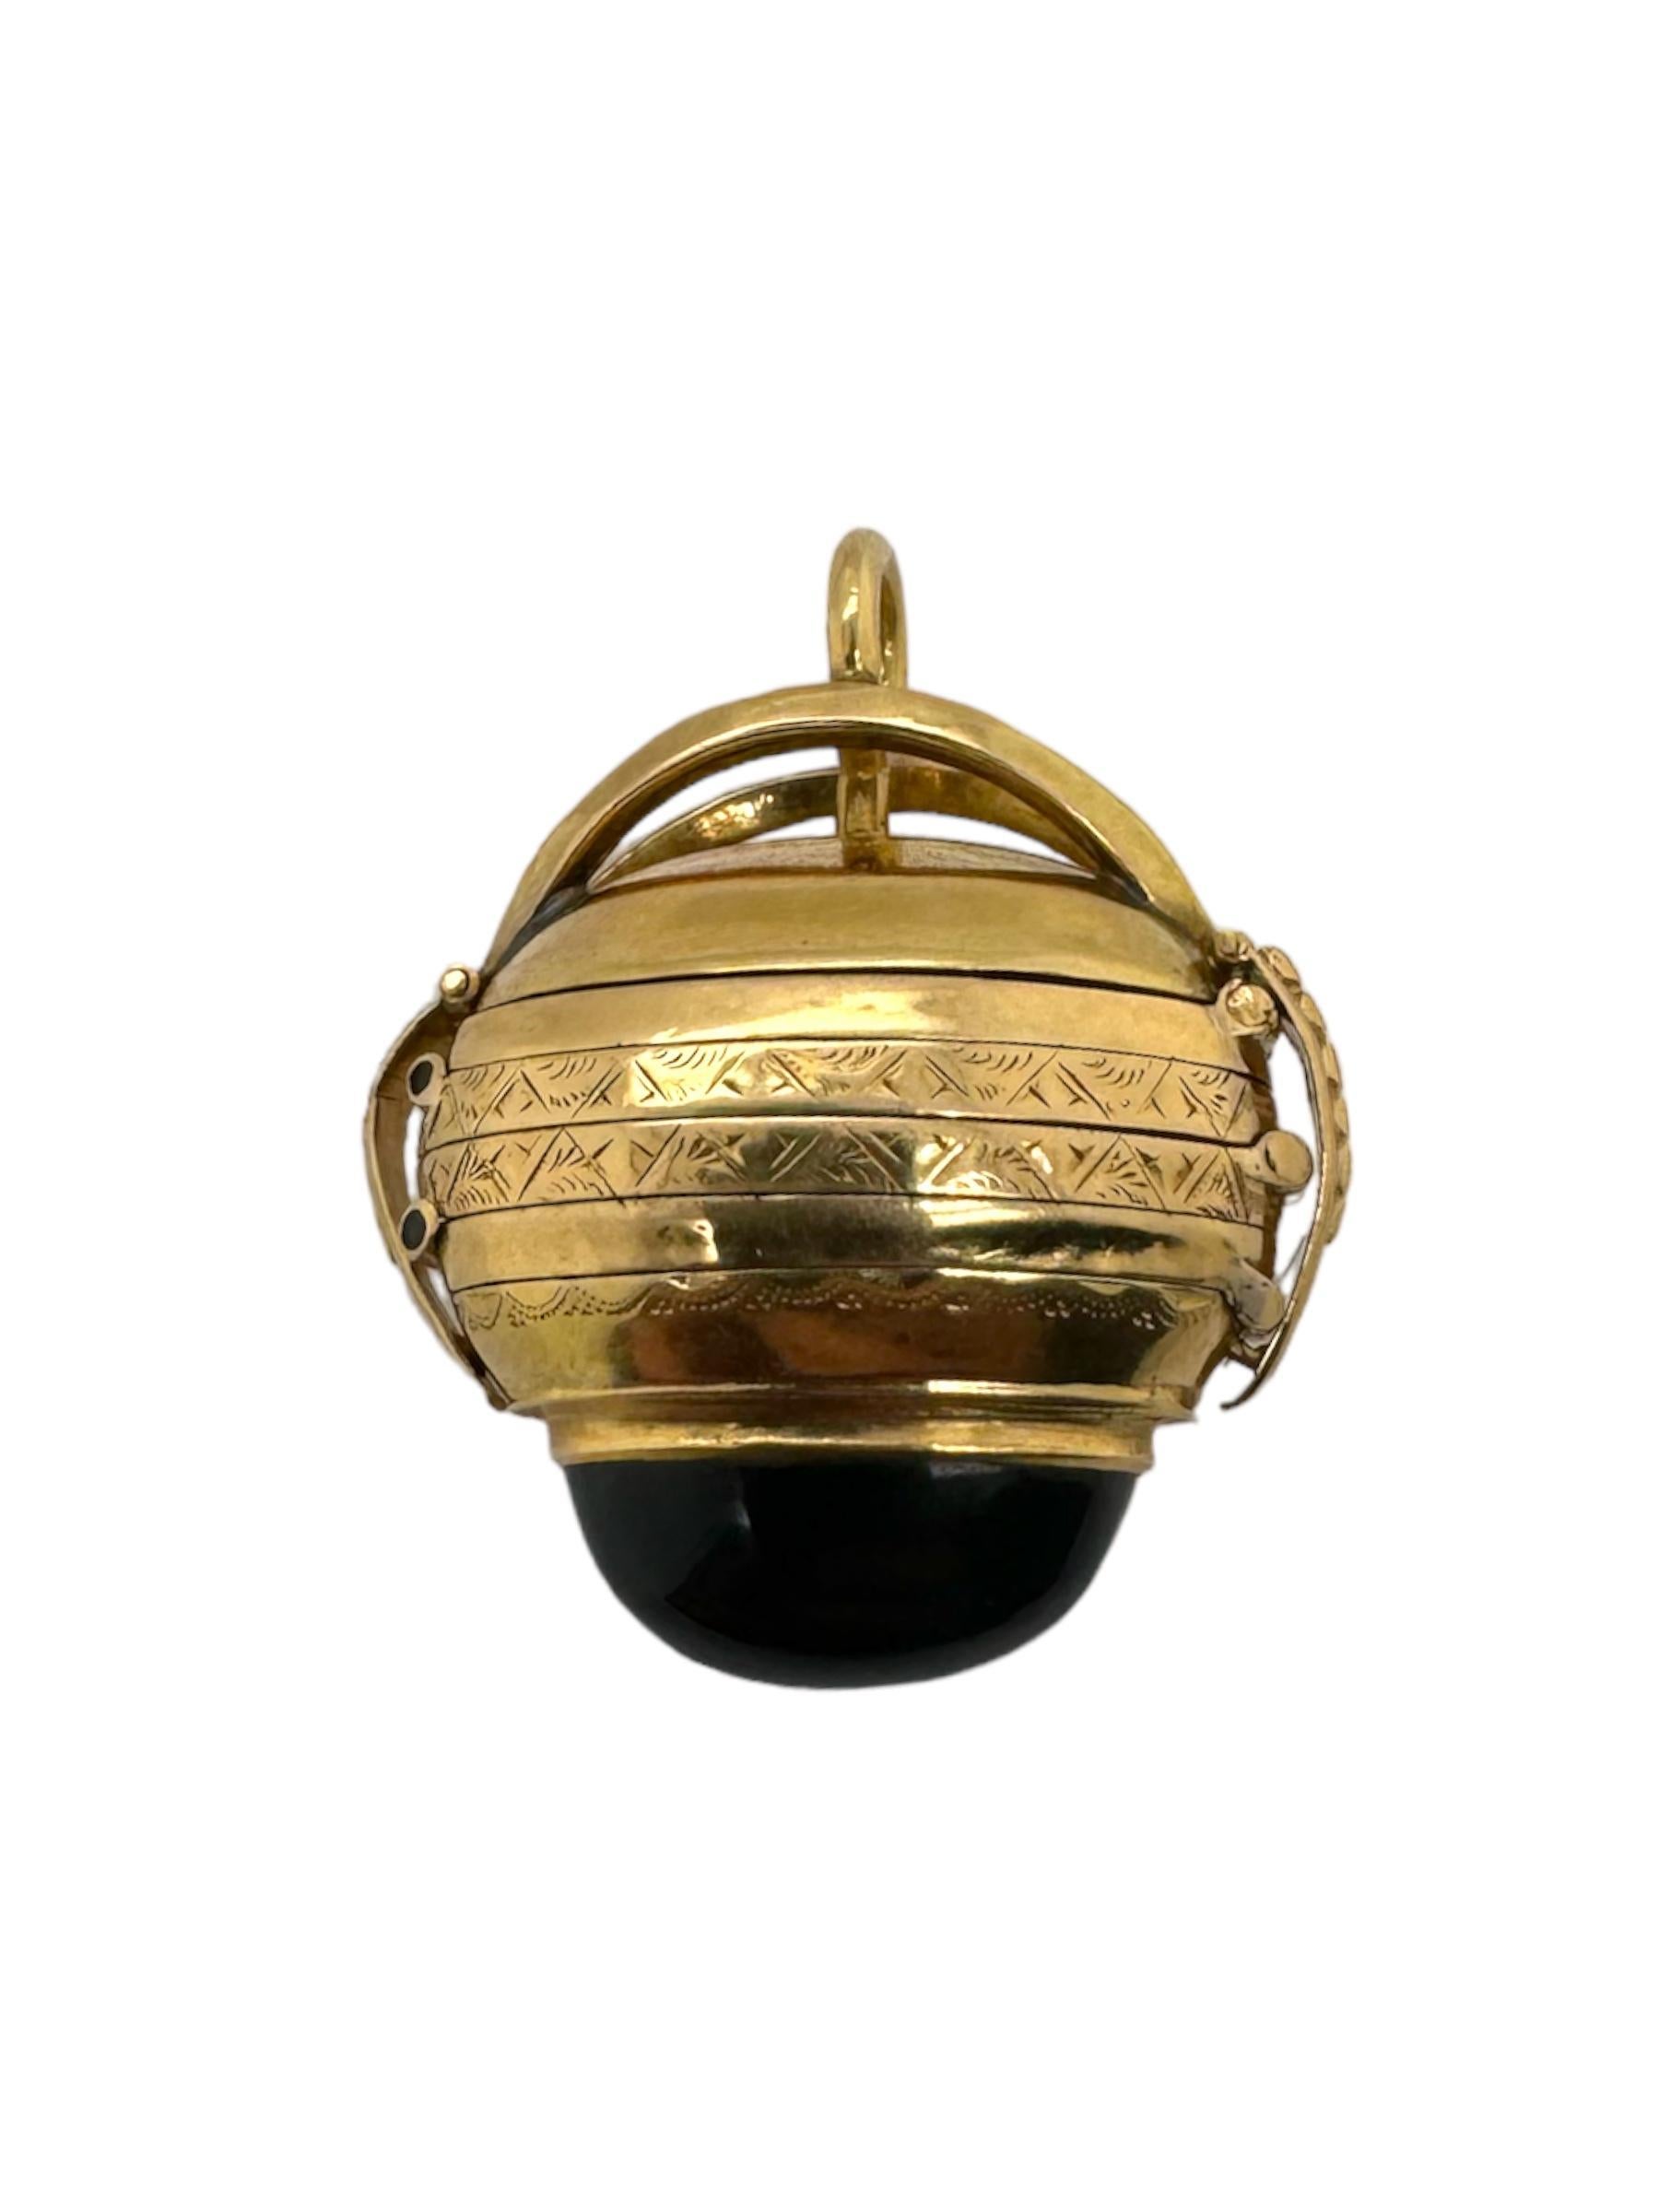 We are in love with this unique piece!!
Most lockets can only hold one or maybe two pictures. 
This beauty unfolds to hold up to SIX!!

Pendant Details
Era: Victorian 1840 - 1900
Metal: 18K Yellow Gold
WeightL 9.2 Grams
Measurements: 25mm Wide X